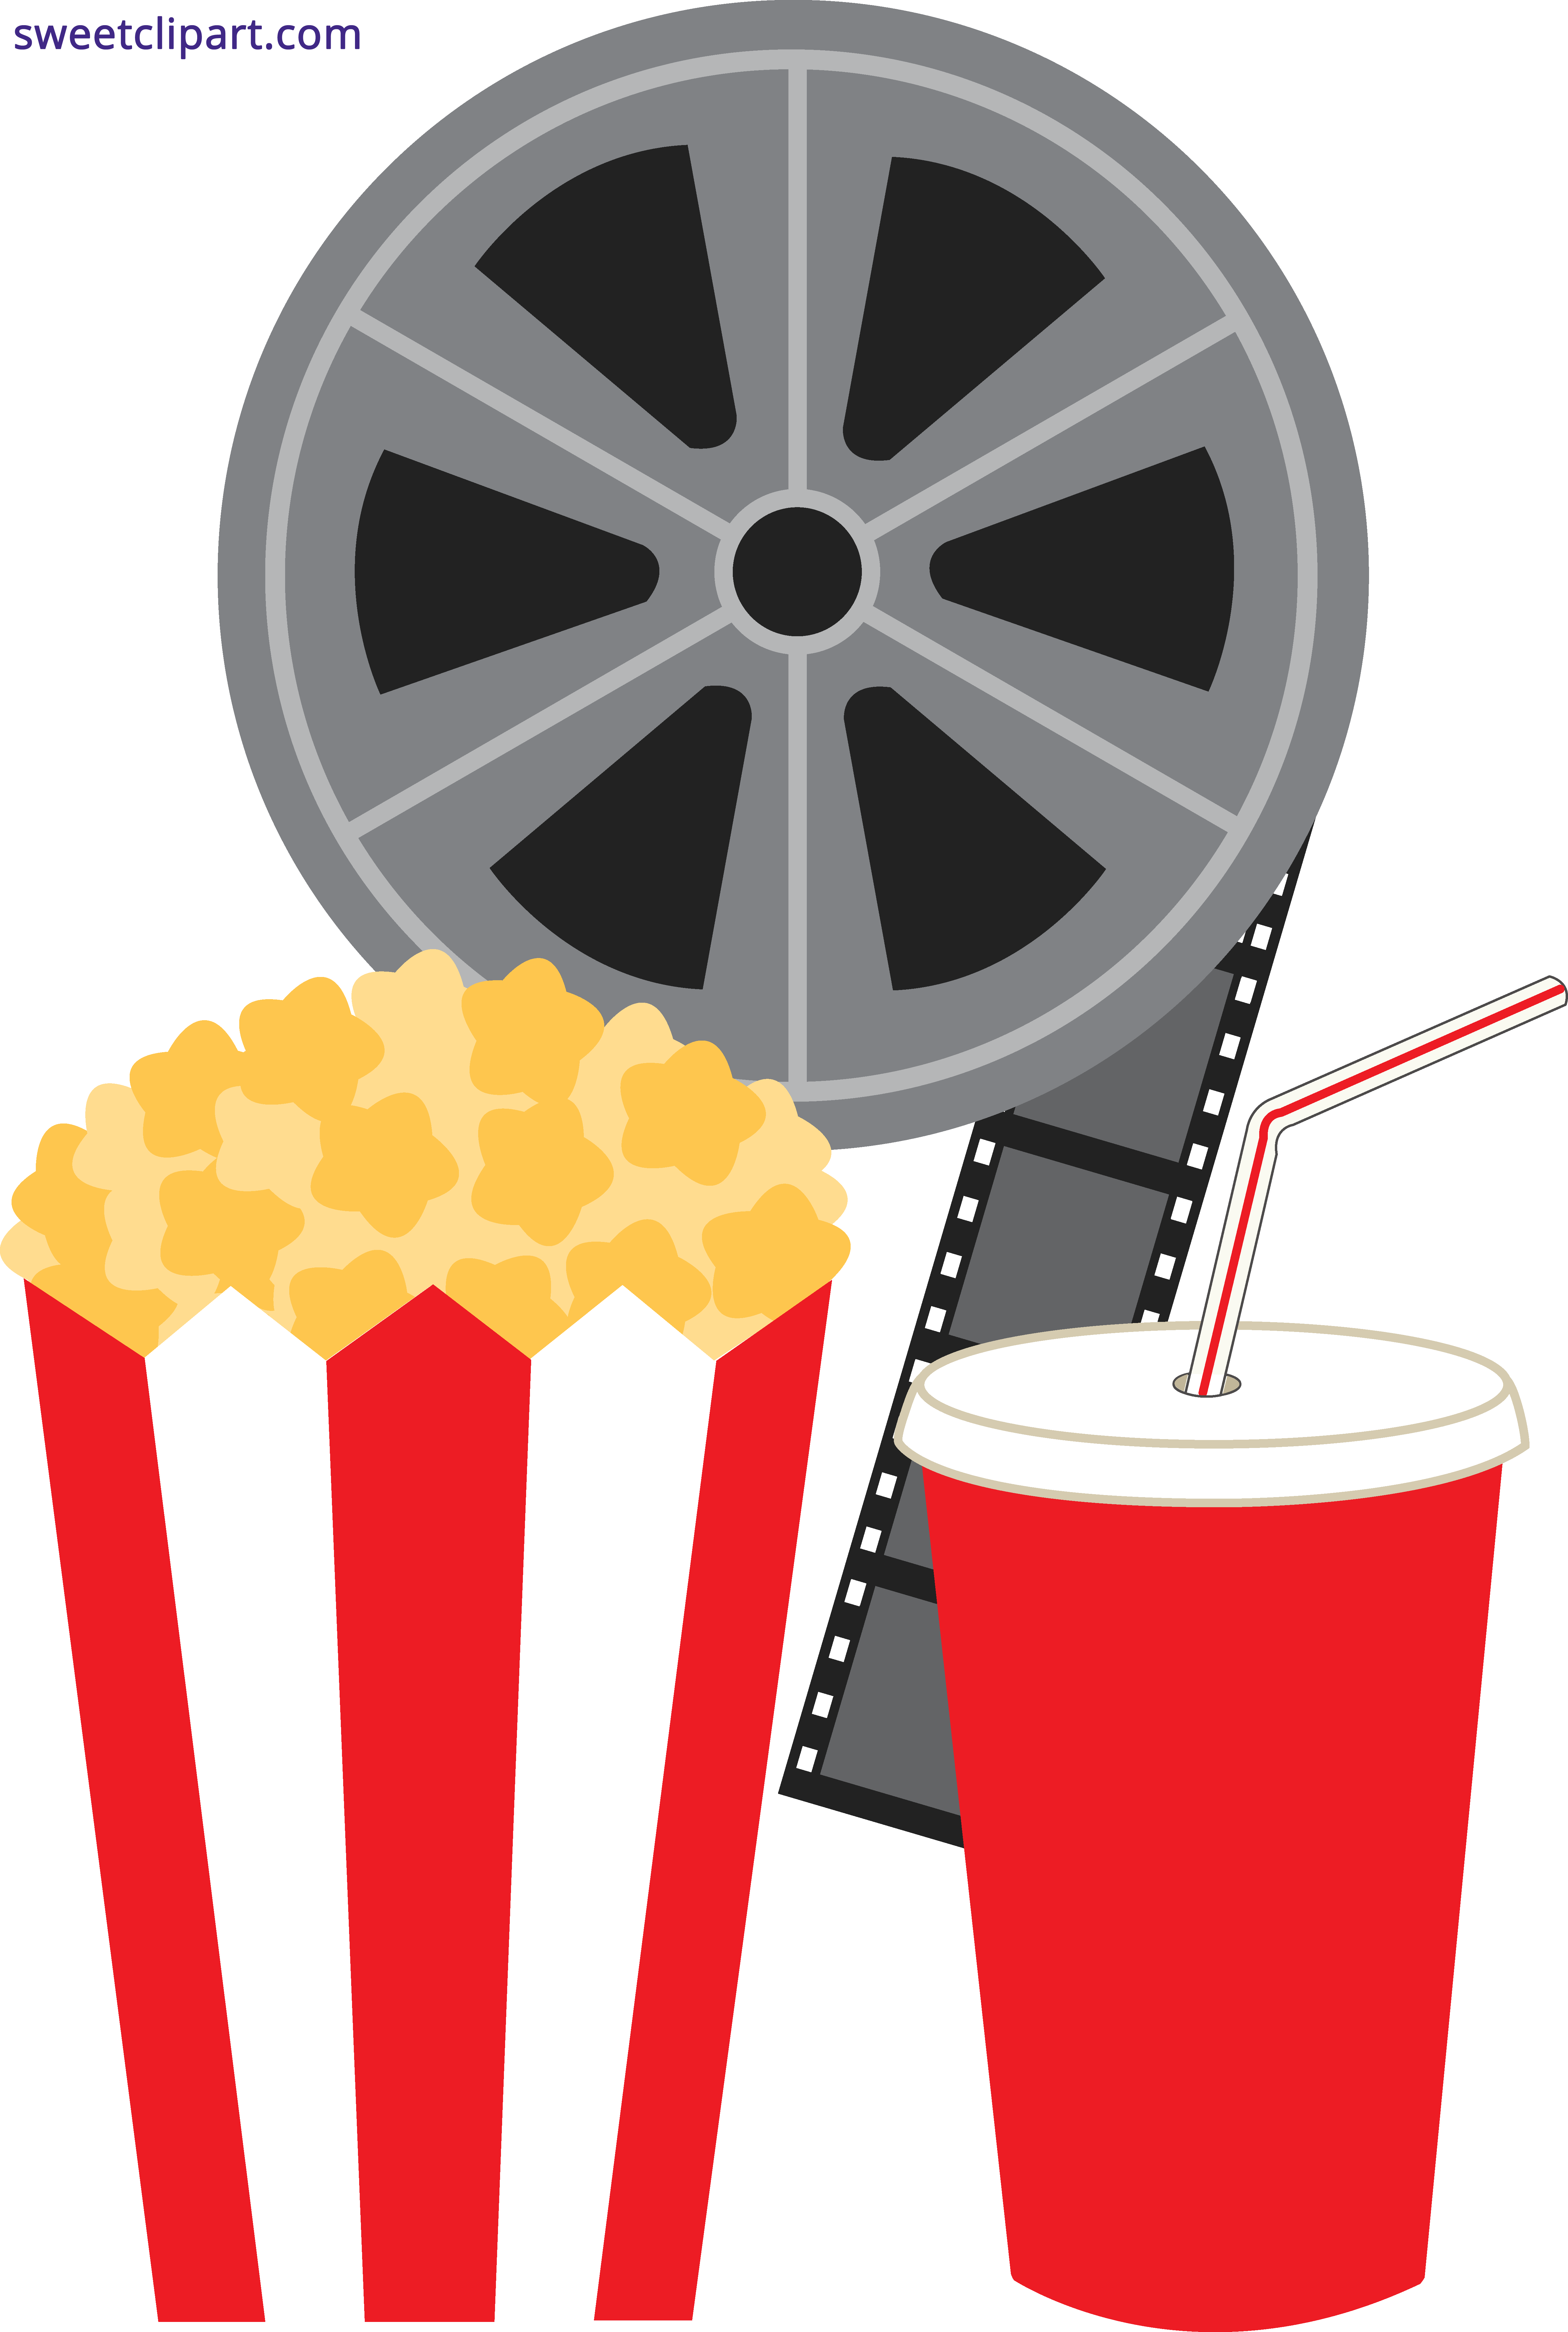 Soda and movie sweet. A clipart popcorn